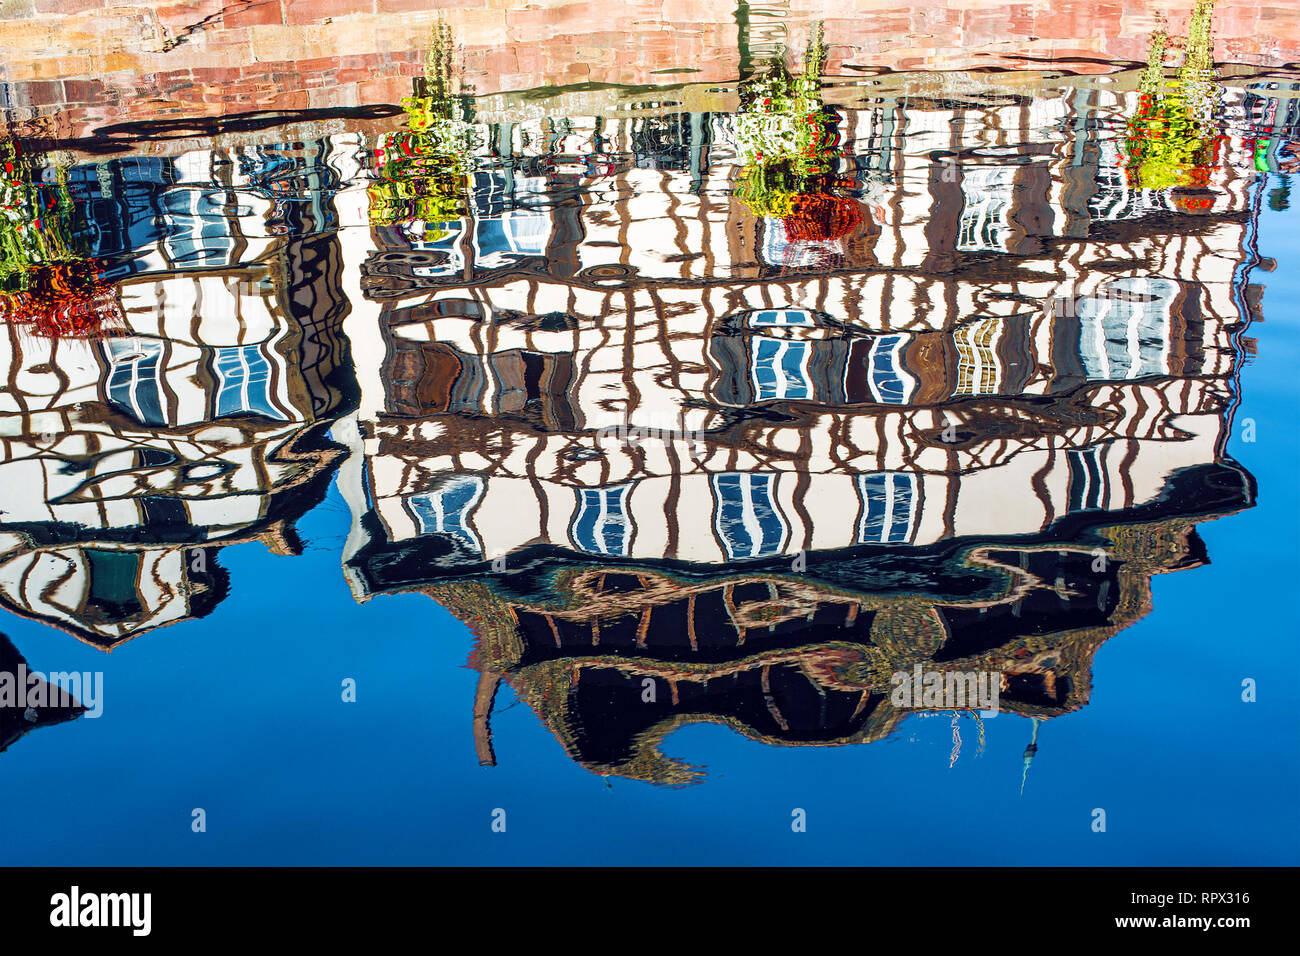 Reflections of traditional timber-frame houses in water, Strasbourg, France Stock Photo